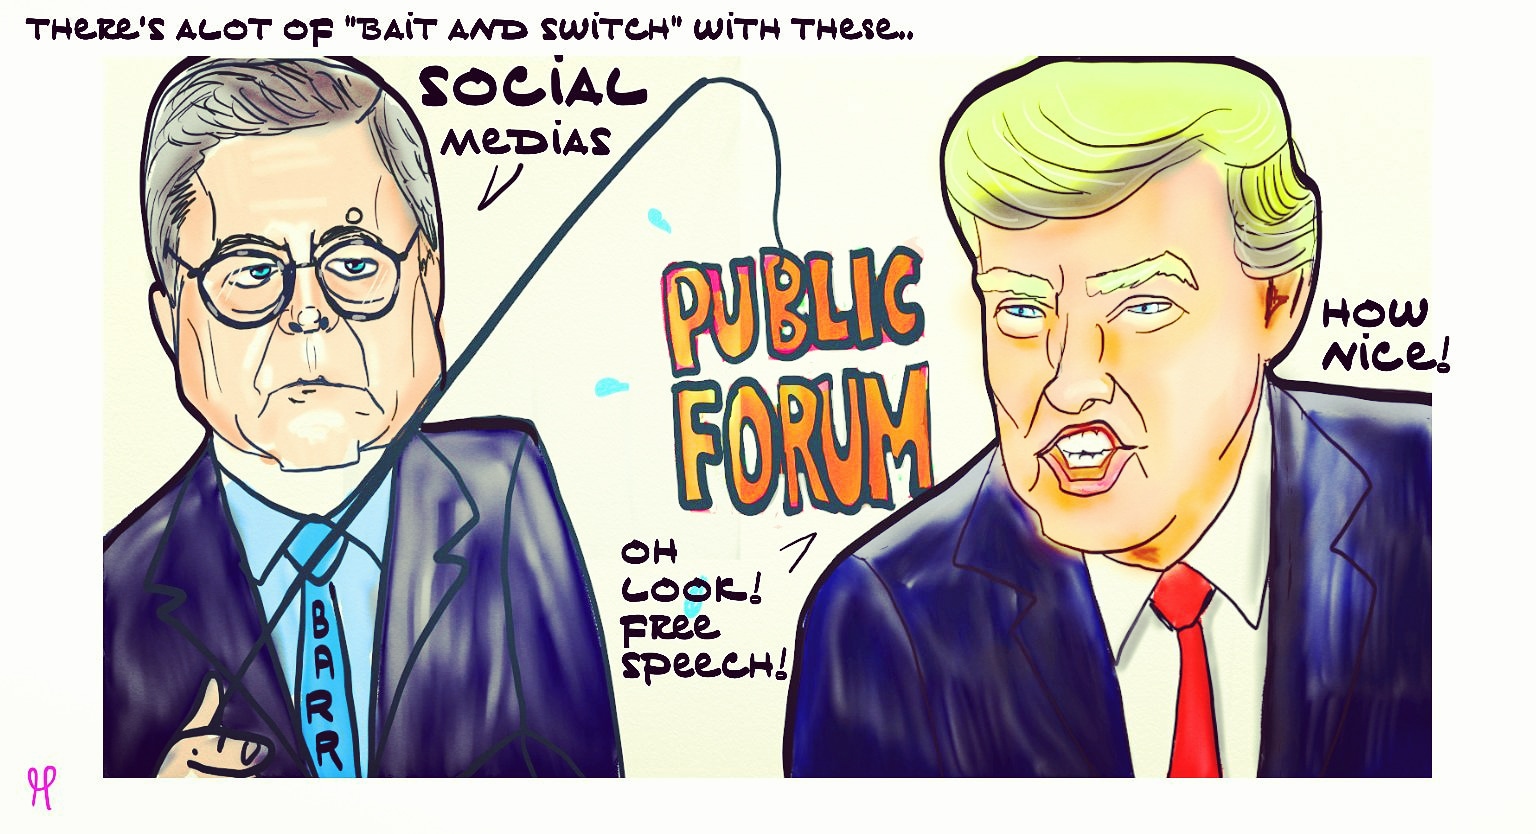 William Barr President Donald Trump social media Twitter Instagram executive order bait and switch #DonaldTrump #William Barr #socialmedia #executiveorder post thumbnail image